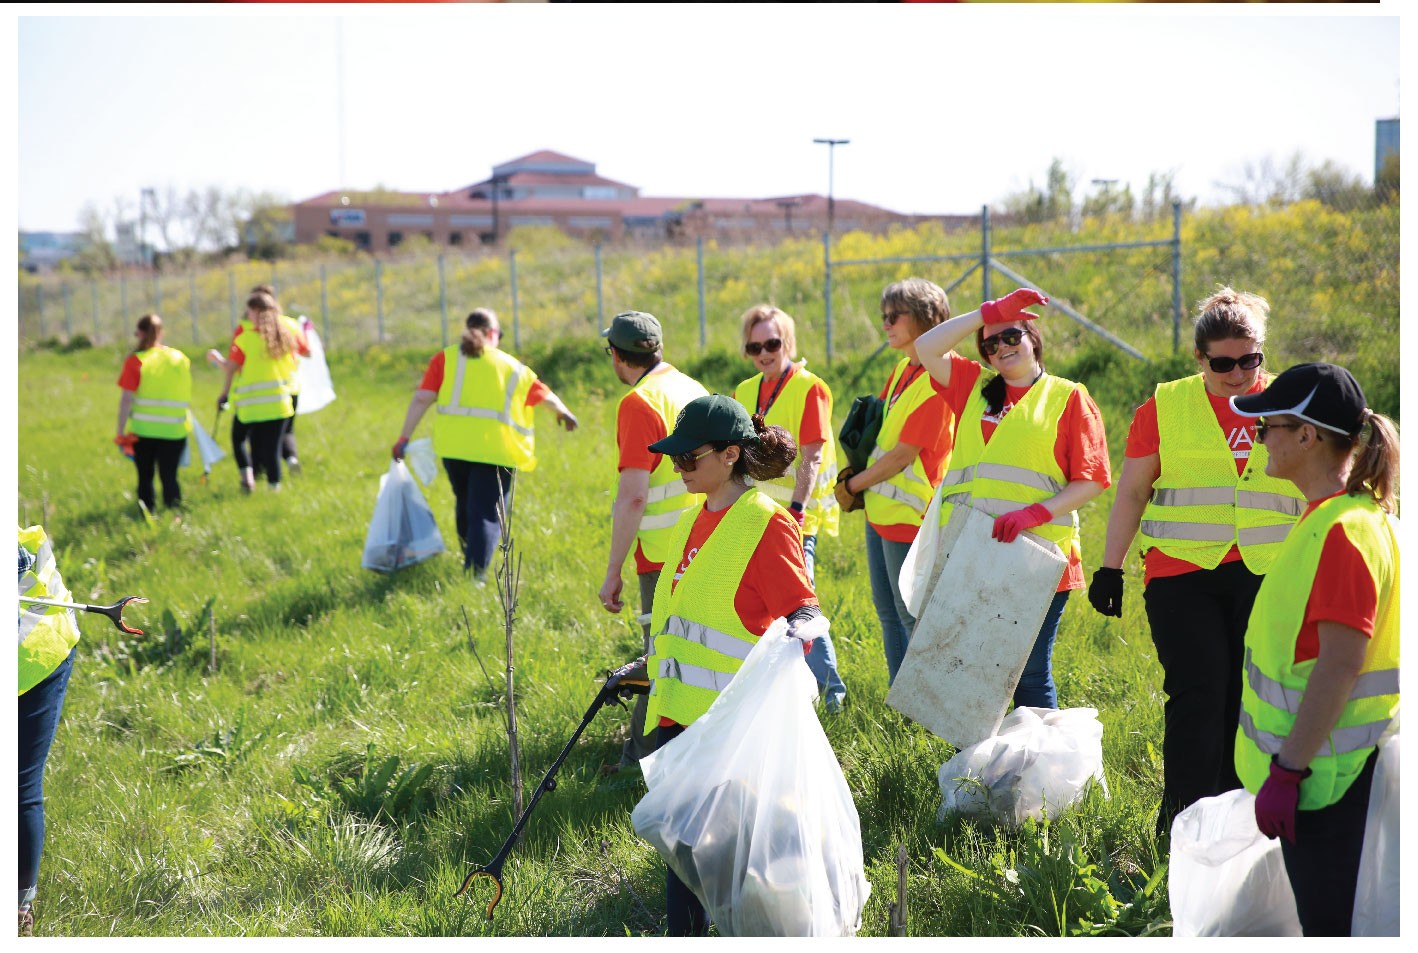 SVA employees giving back by cleaning a stretch of the nearby freeway as part of our 